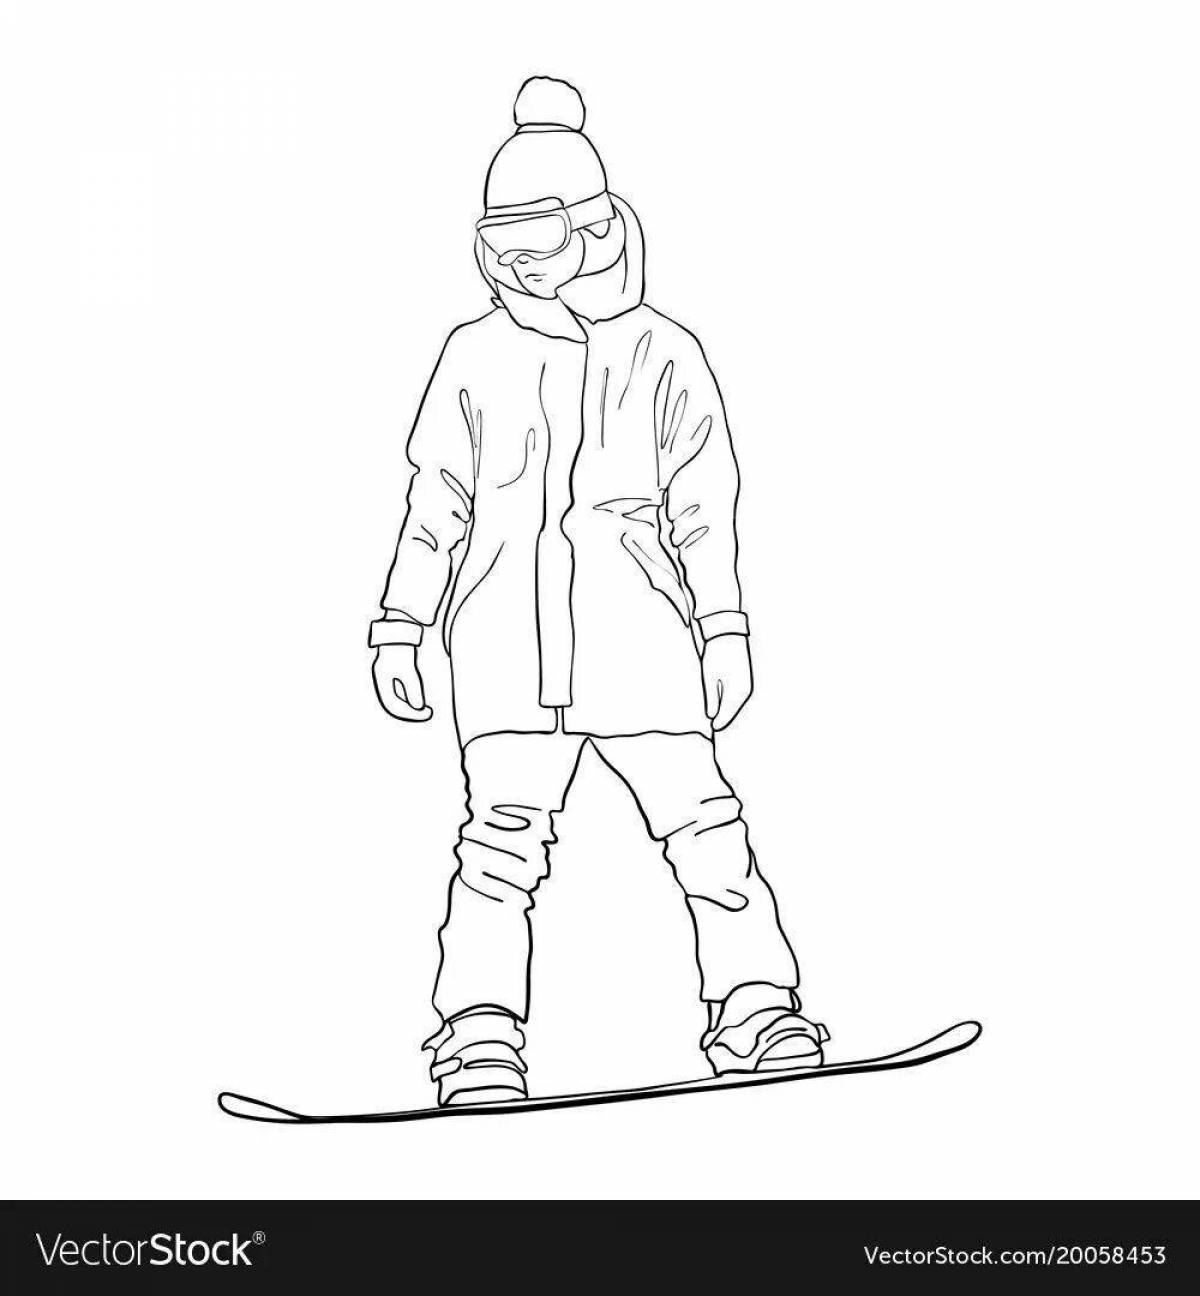 Snowboarder bright coloring for kids